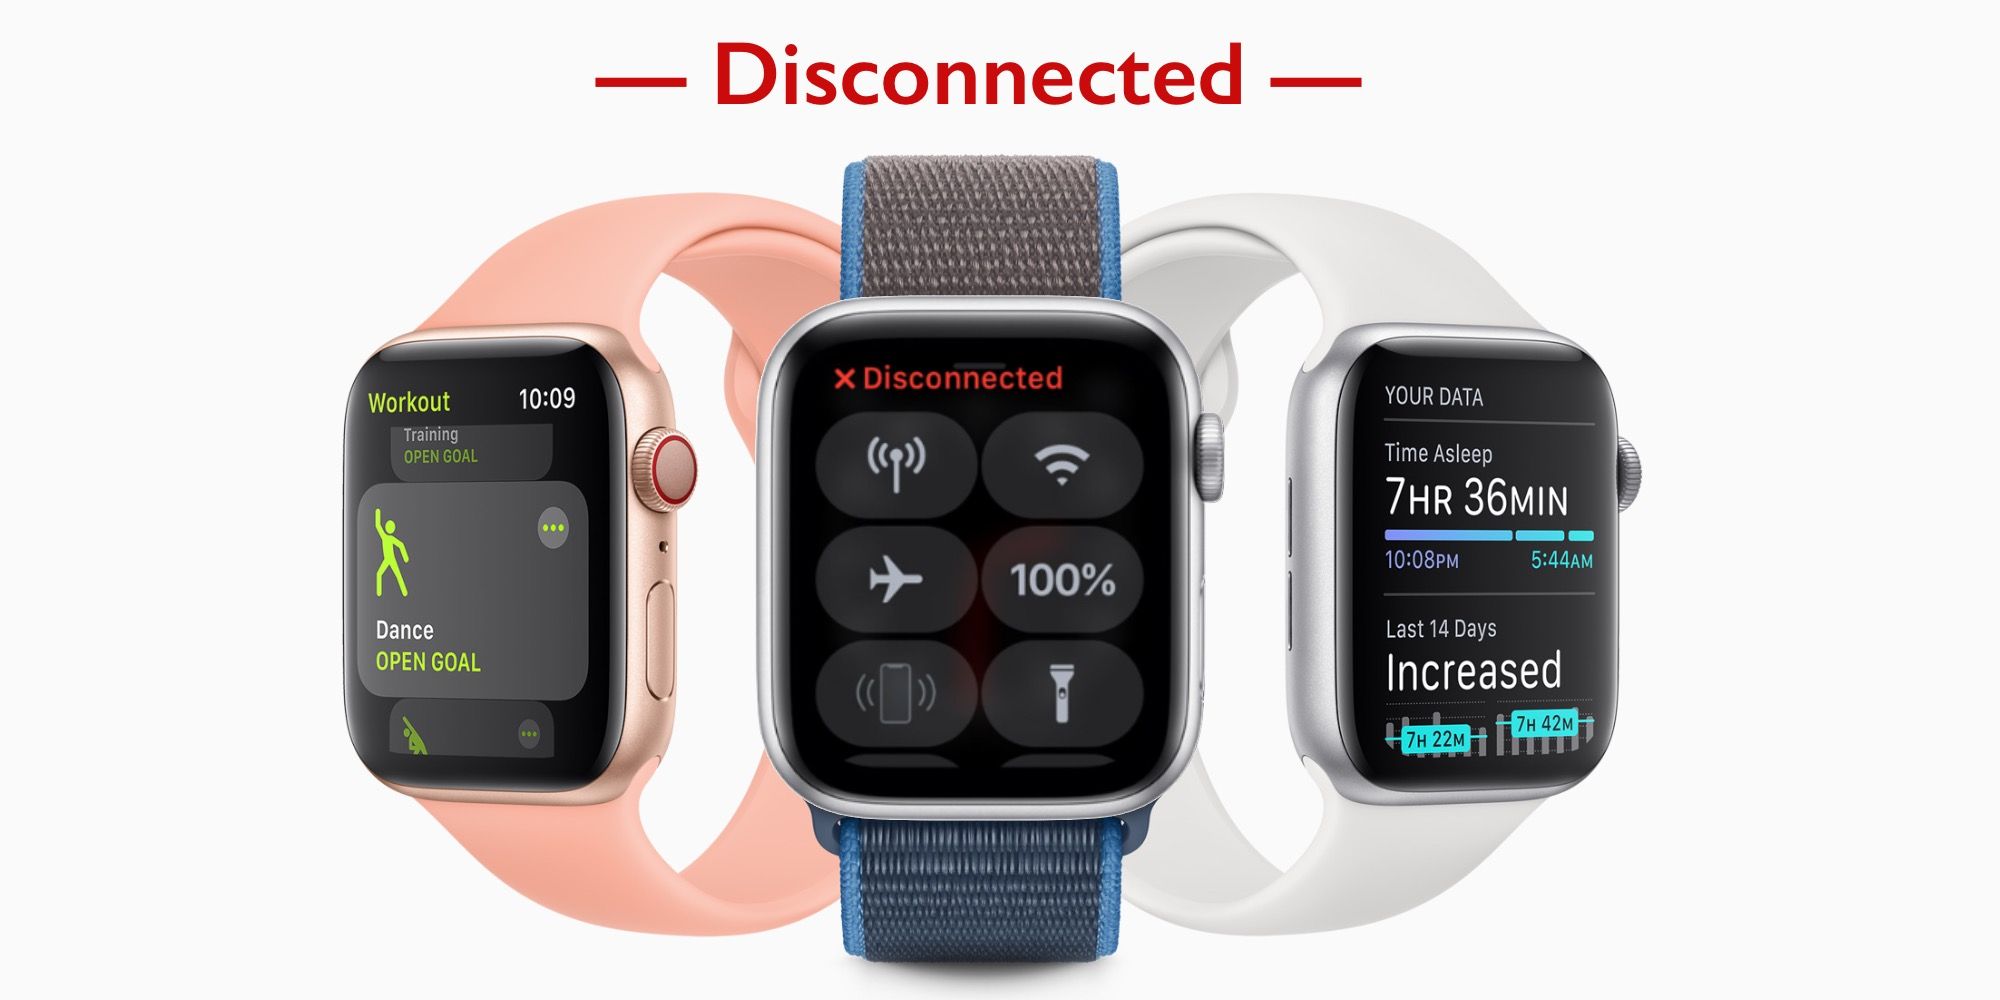 Apple Watch Disconnected